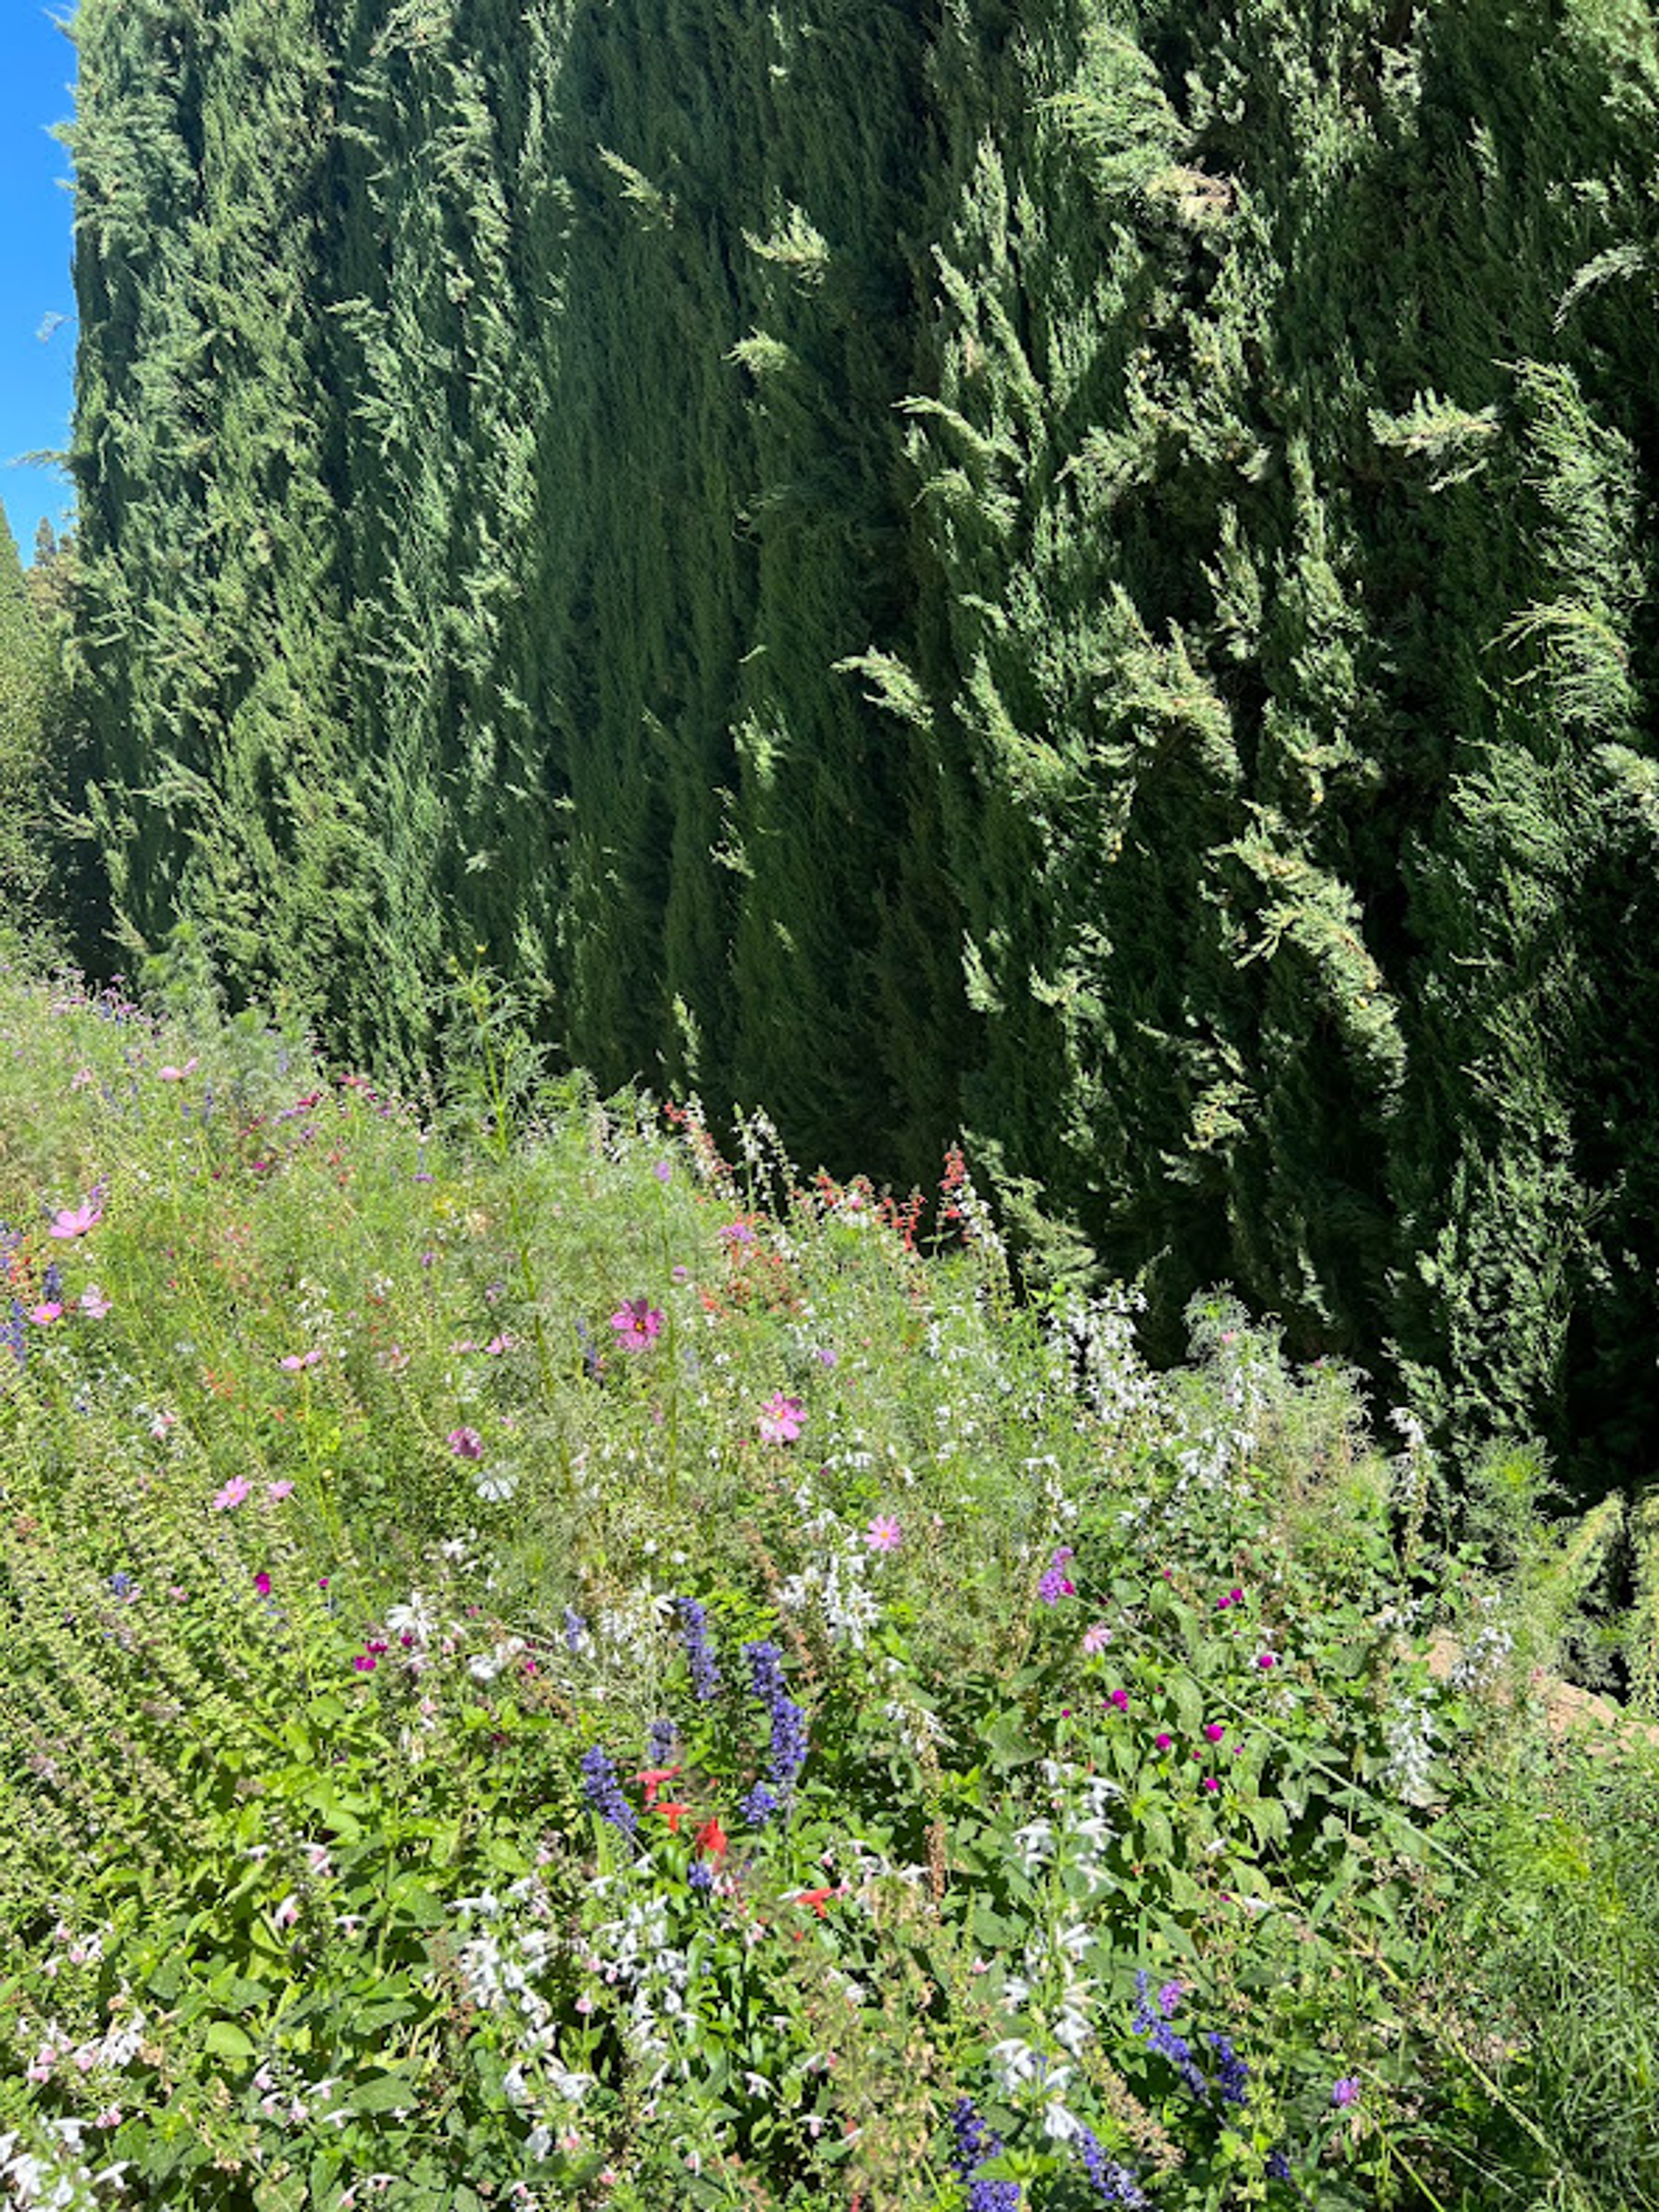 More wildflowers with cyprus trees!